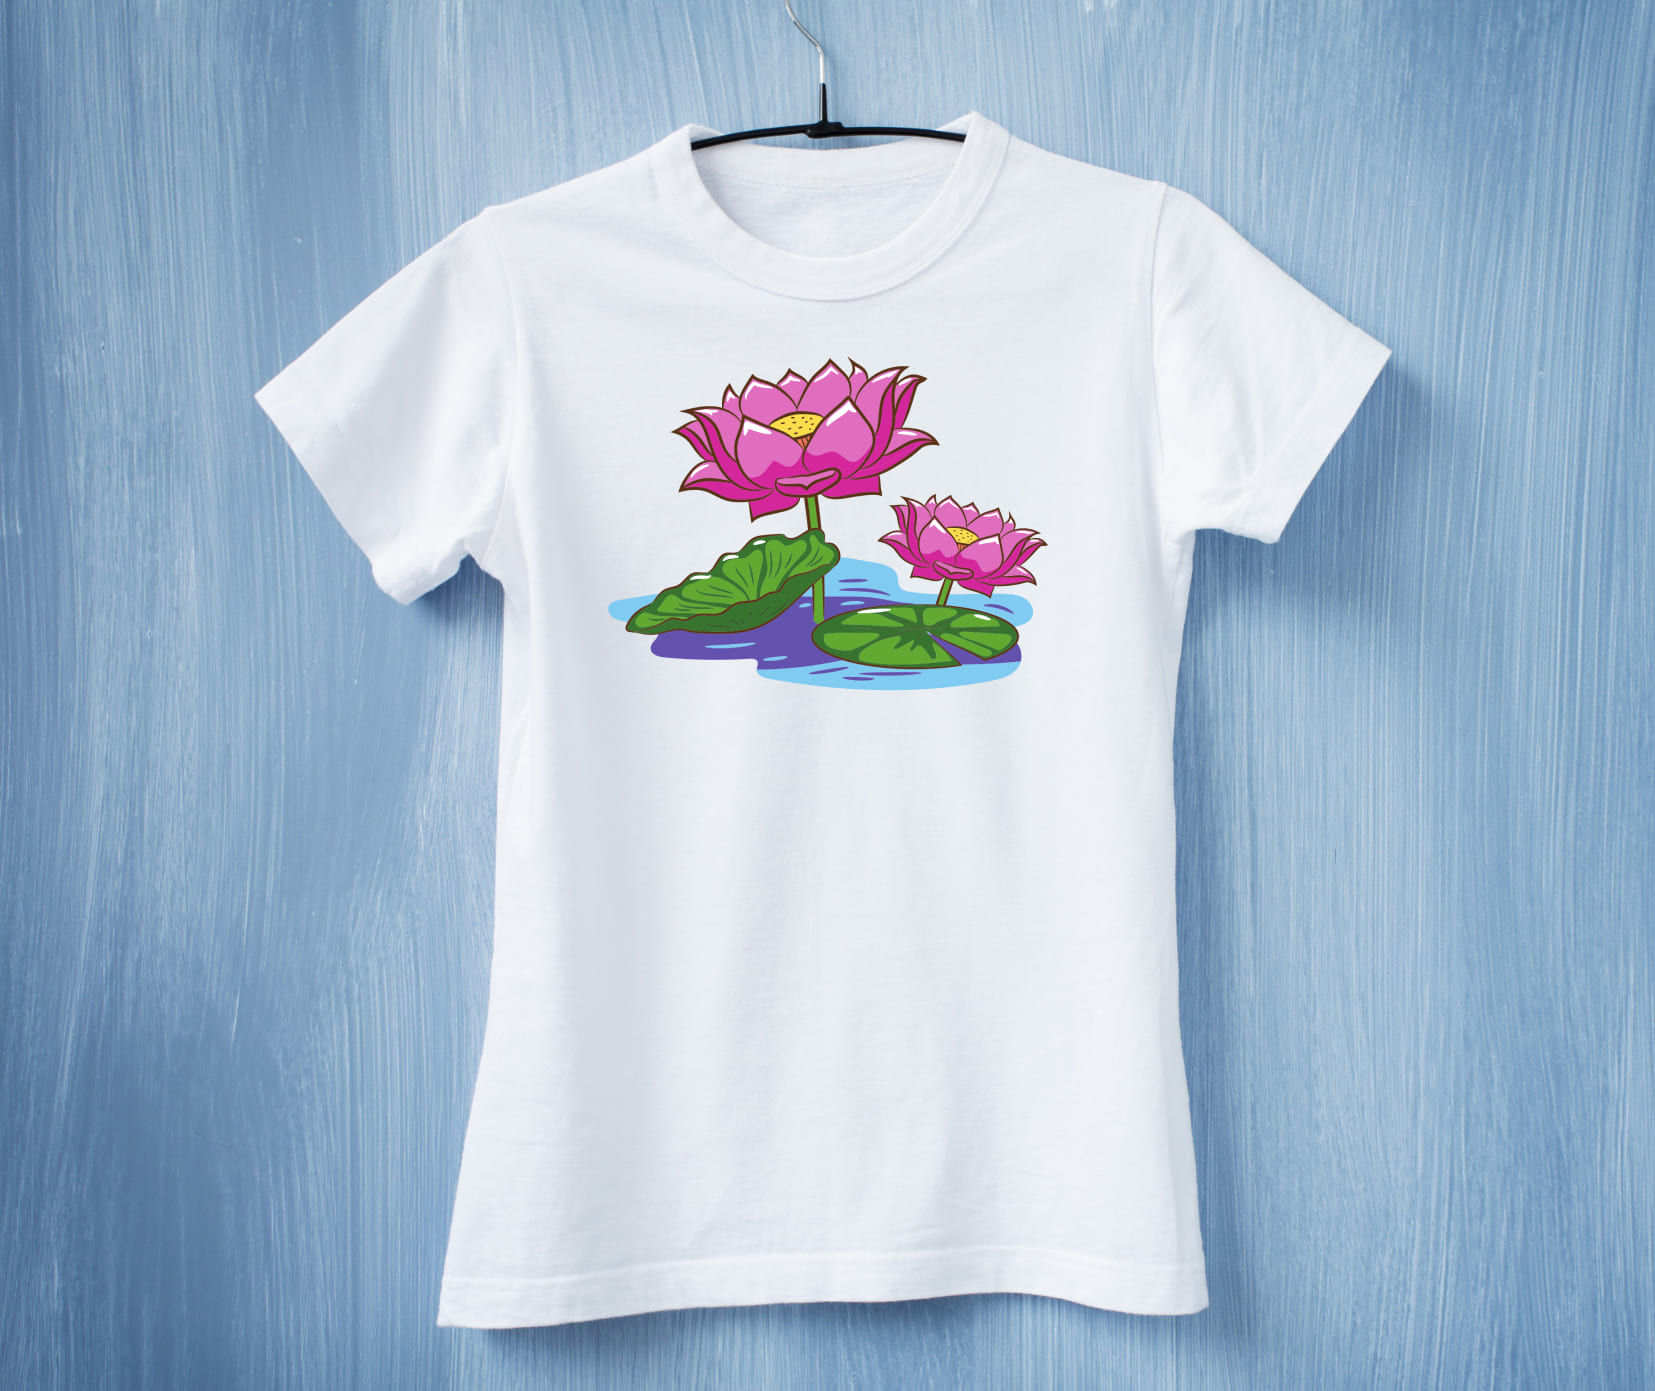 Women white t-shirt with two blossom lotuses.